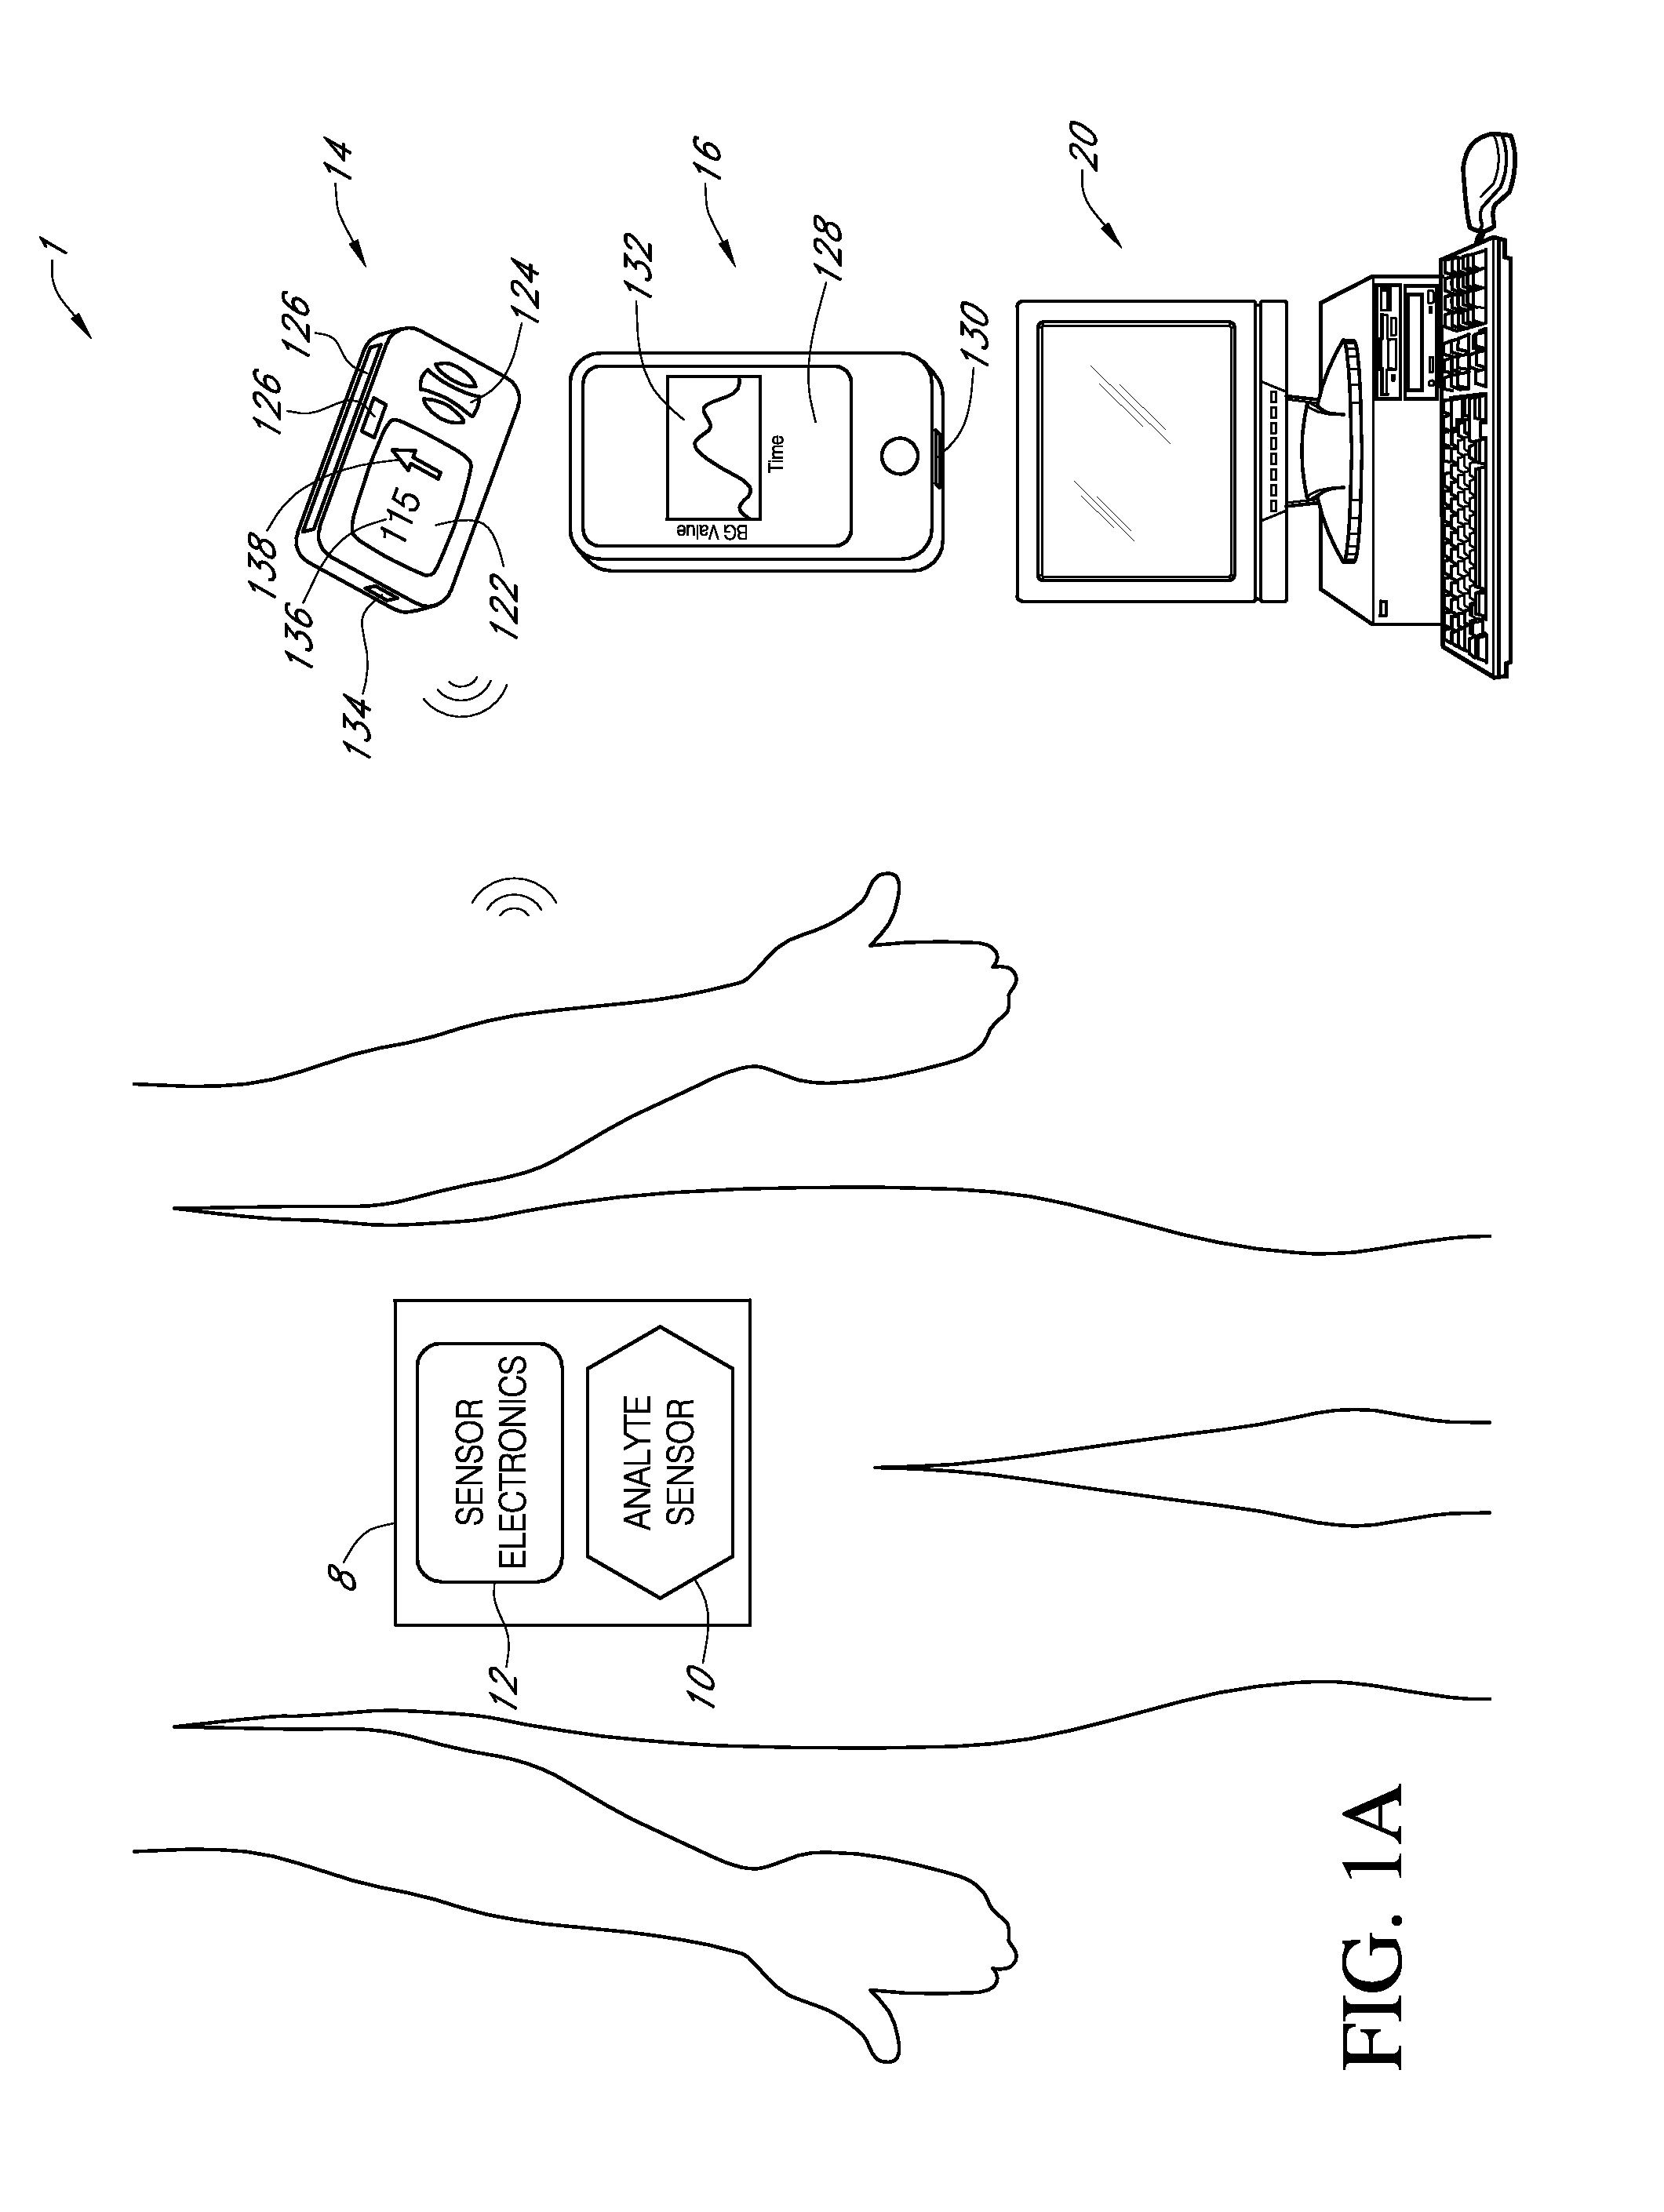 Systems and methods for communicating sensor data between communication devices